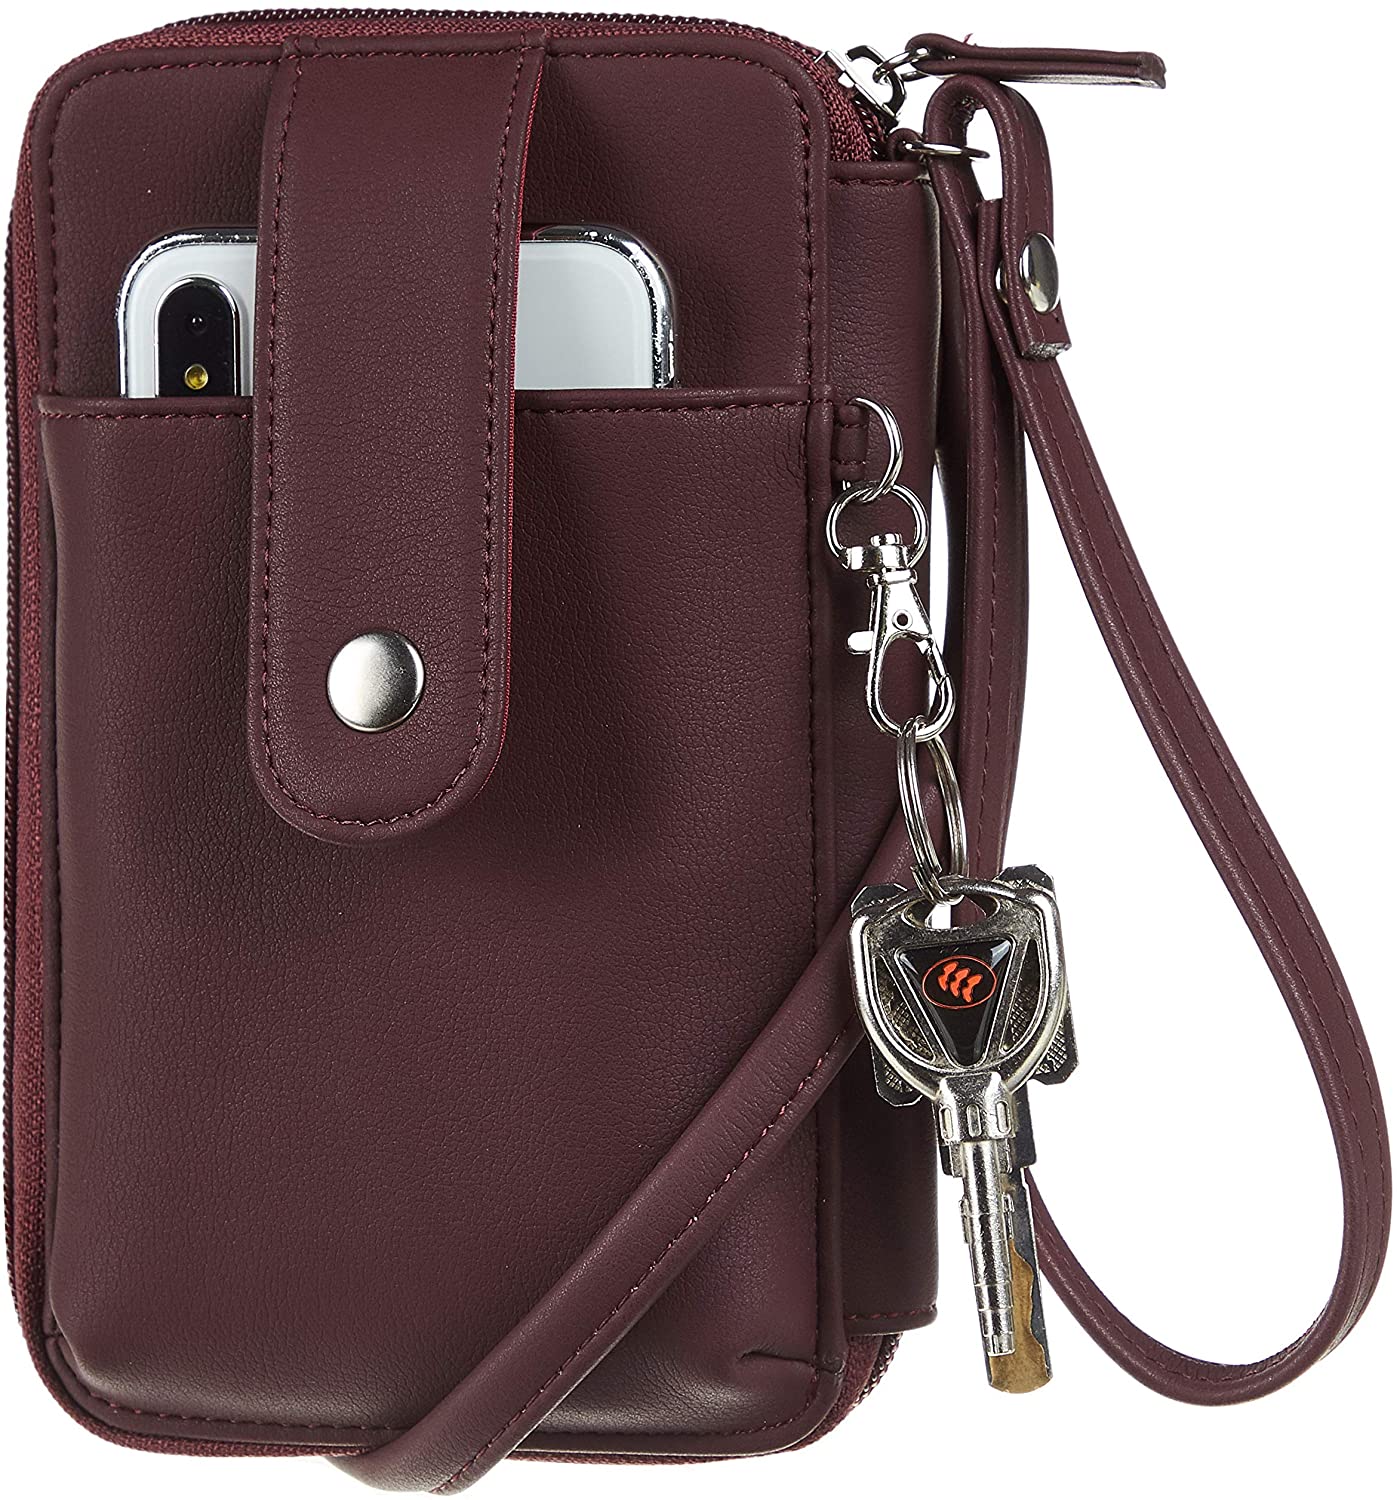 Sodsay Leather RFID Womens Crossbody Cell Phone Purse Credit Card